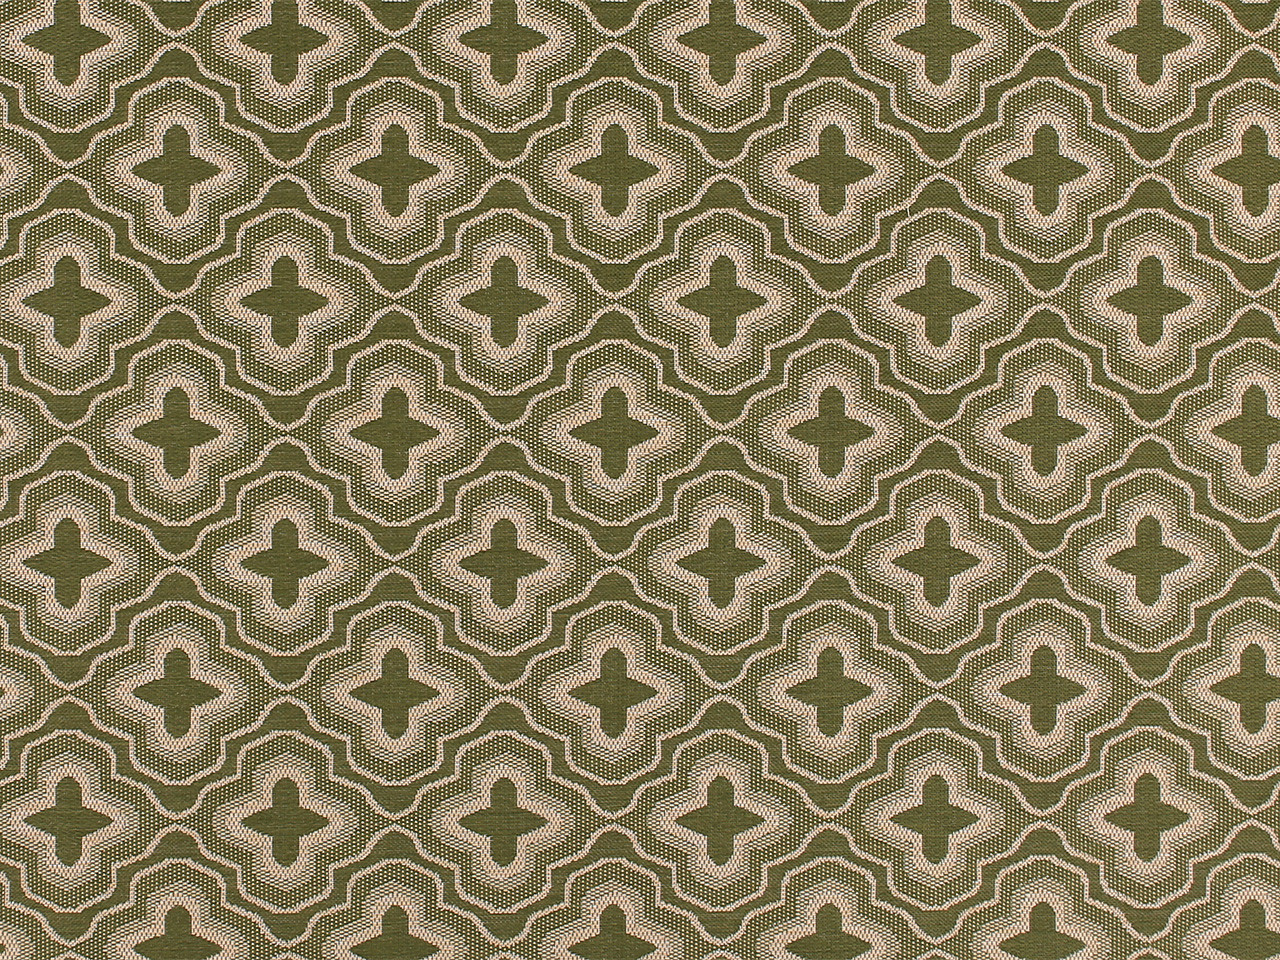 Olive and Tan Baroque Tile 7.11 ft. x 10.1 ft. Rug